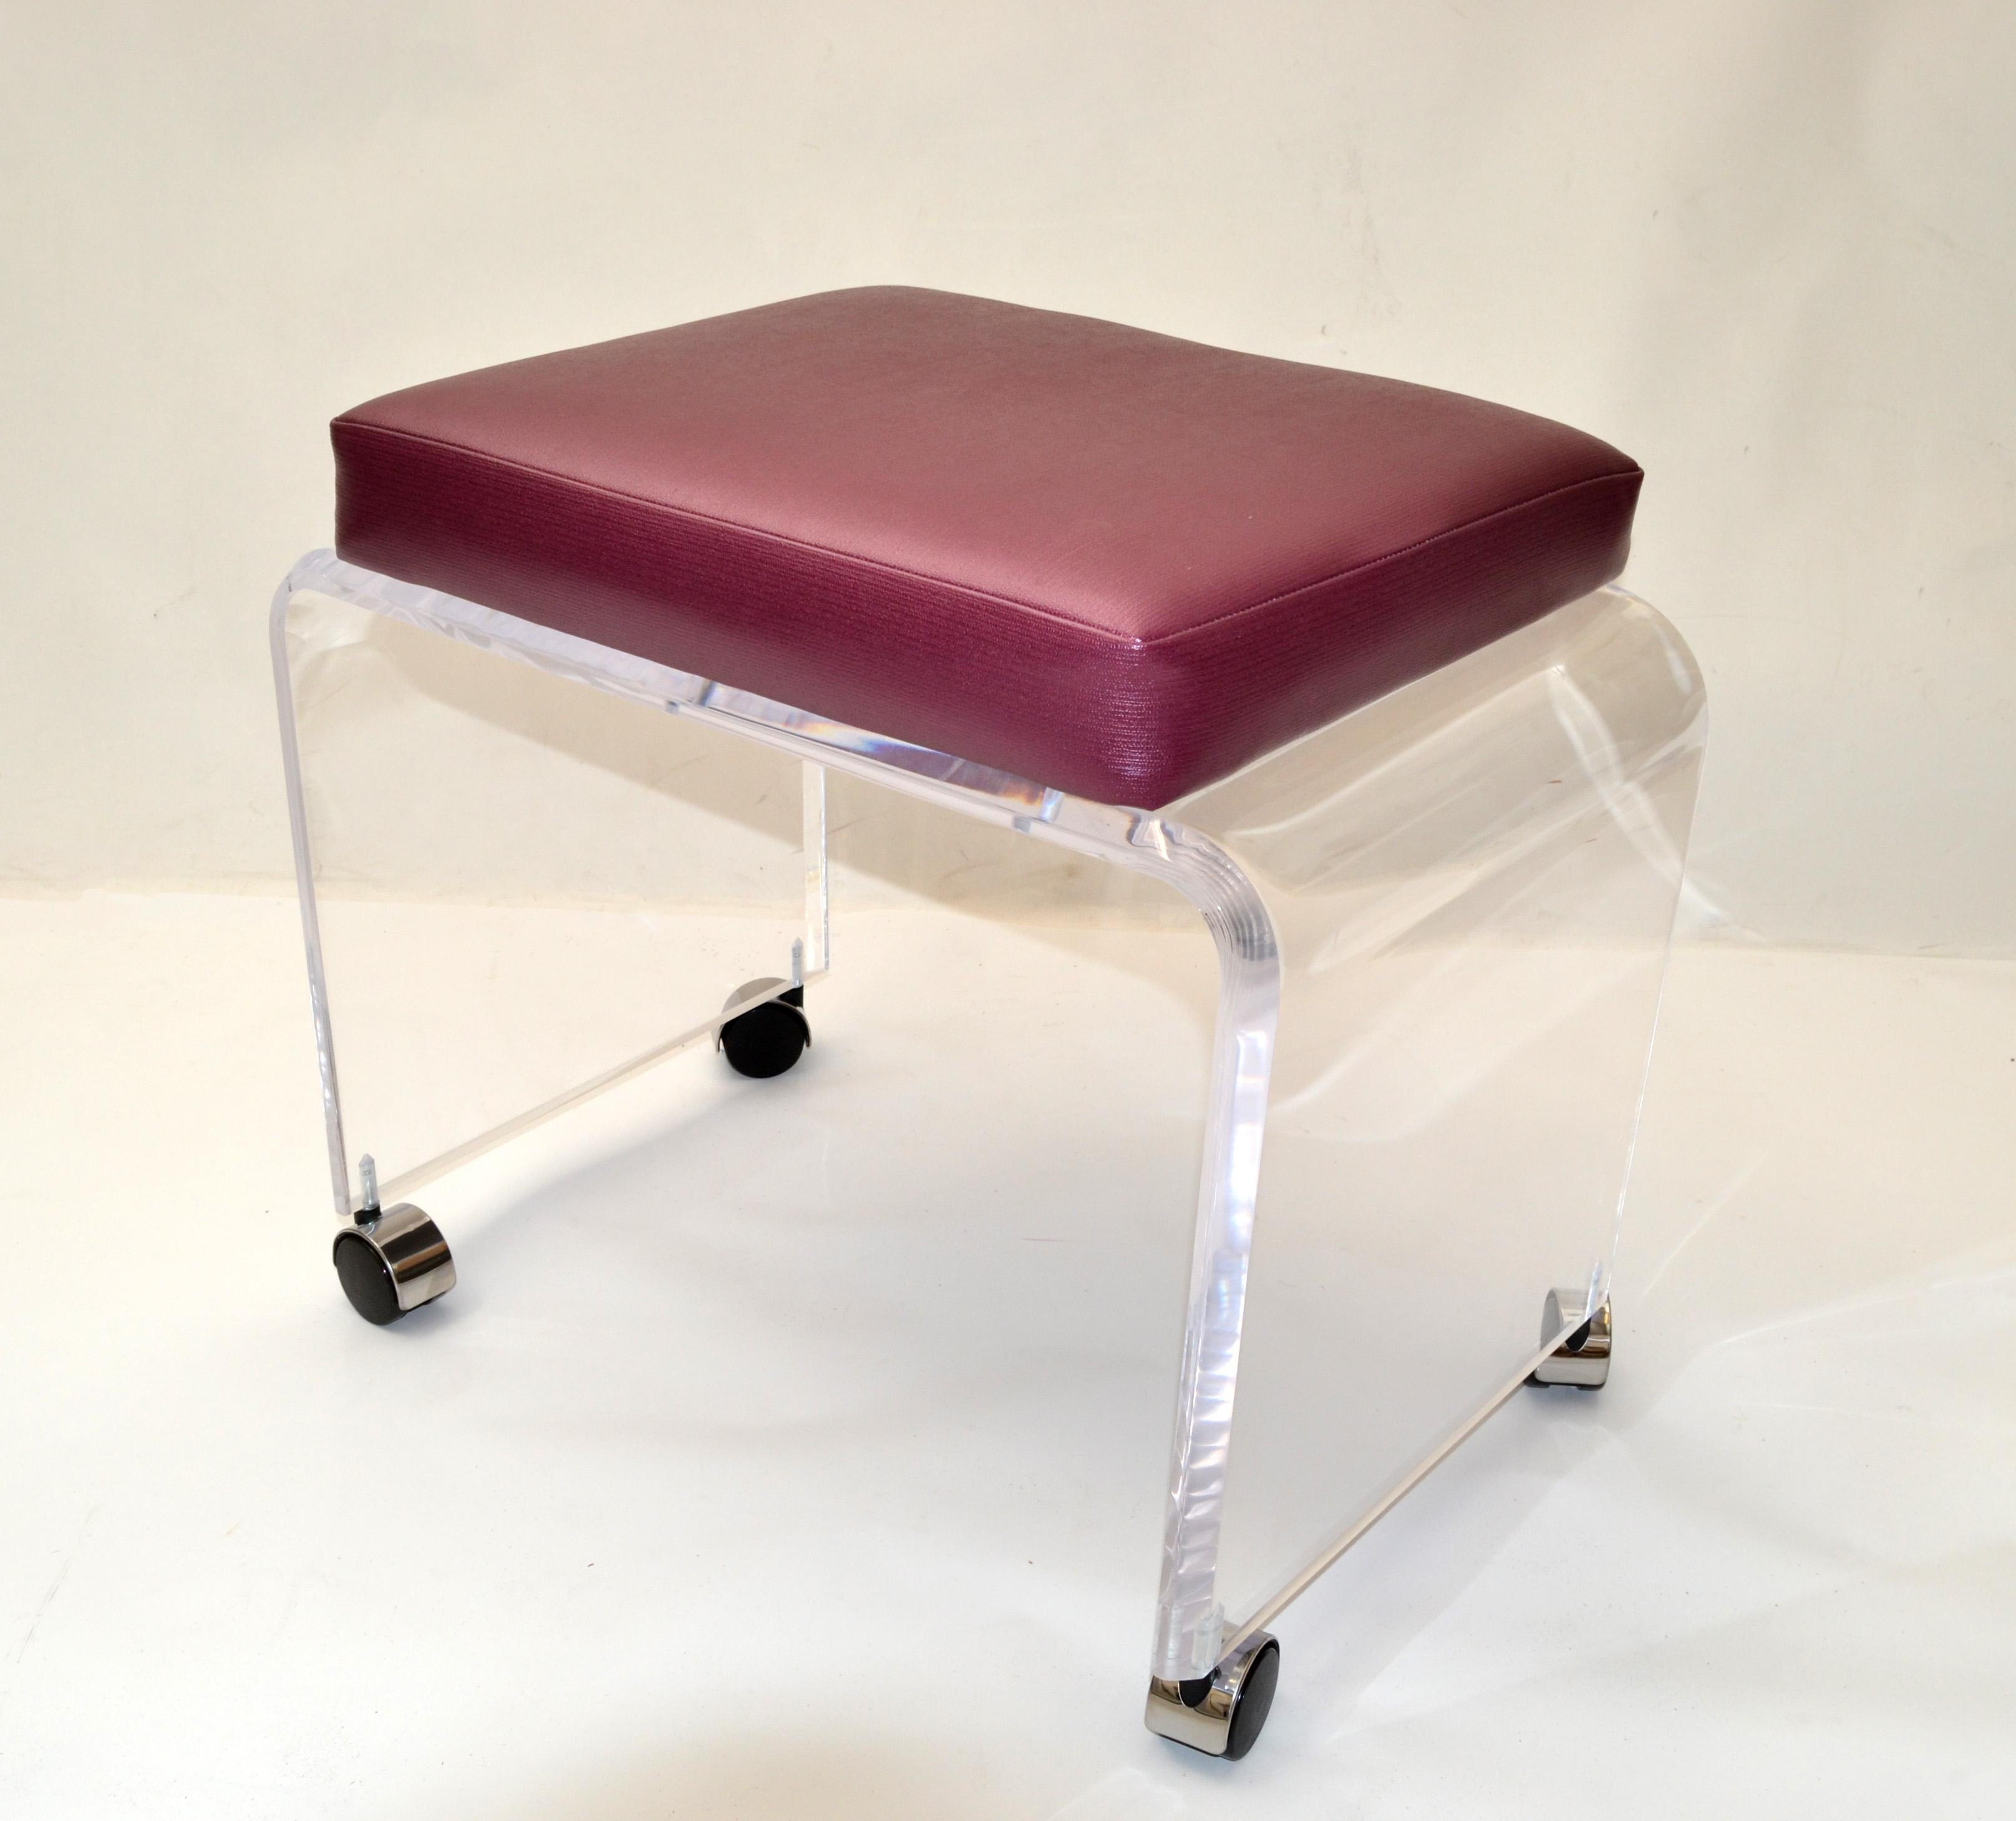 Mid-Century Modern Lucite stool with dark Magenta patent leather seat upholstery on Chrome casters.
This stool can be used as a footstool, vanity stool, bench or a place to put your magazine.
The stool is firm and sturdy, ready for a new home.
  